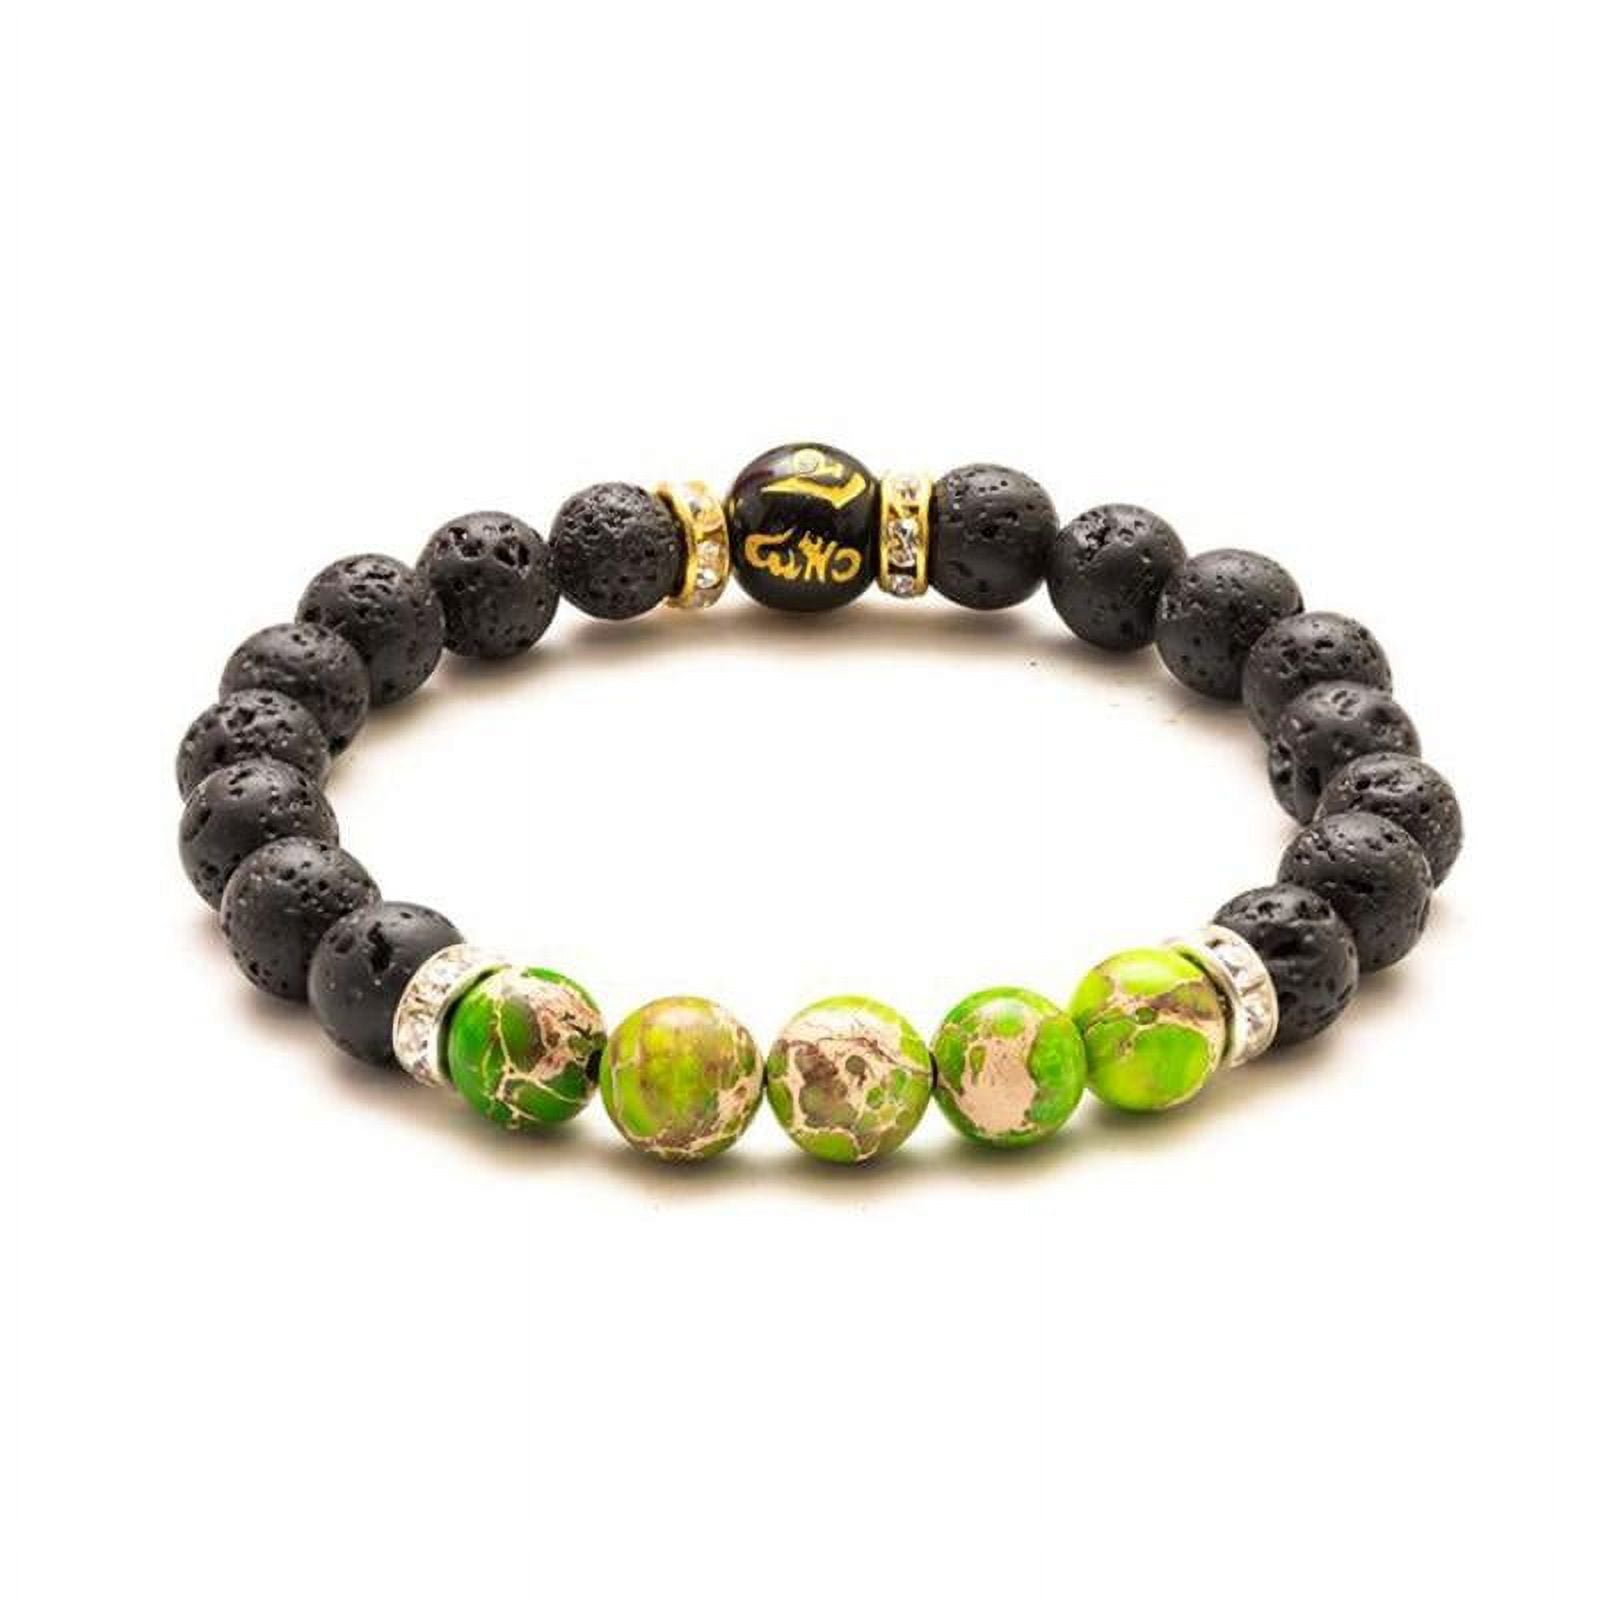 7 CHAKRA Bracelet with Meaning Cardfor Men Women Natural Crystal Healing  Anxiety | eBay